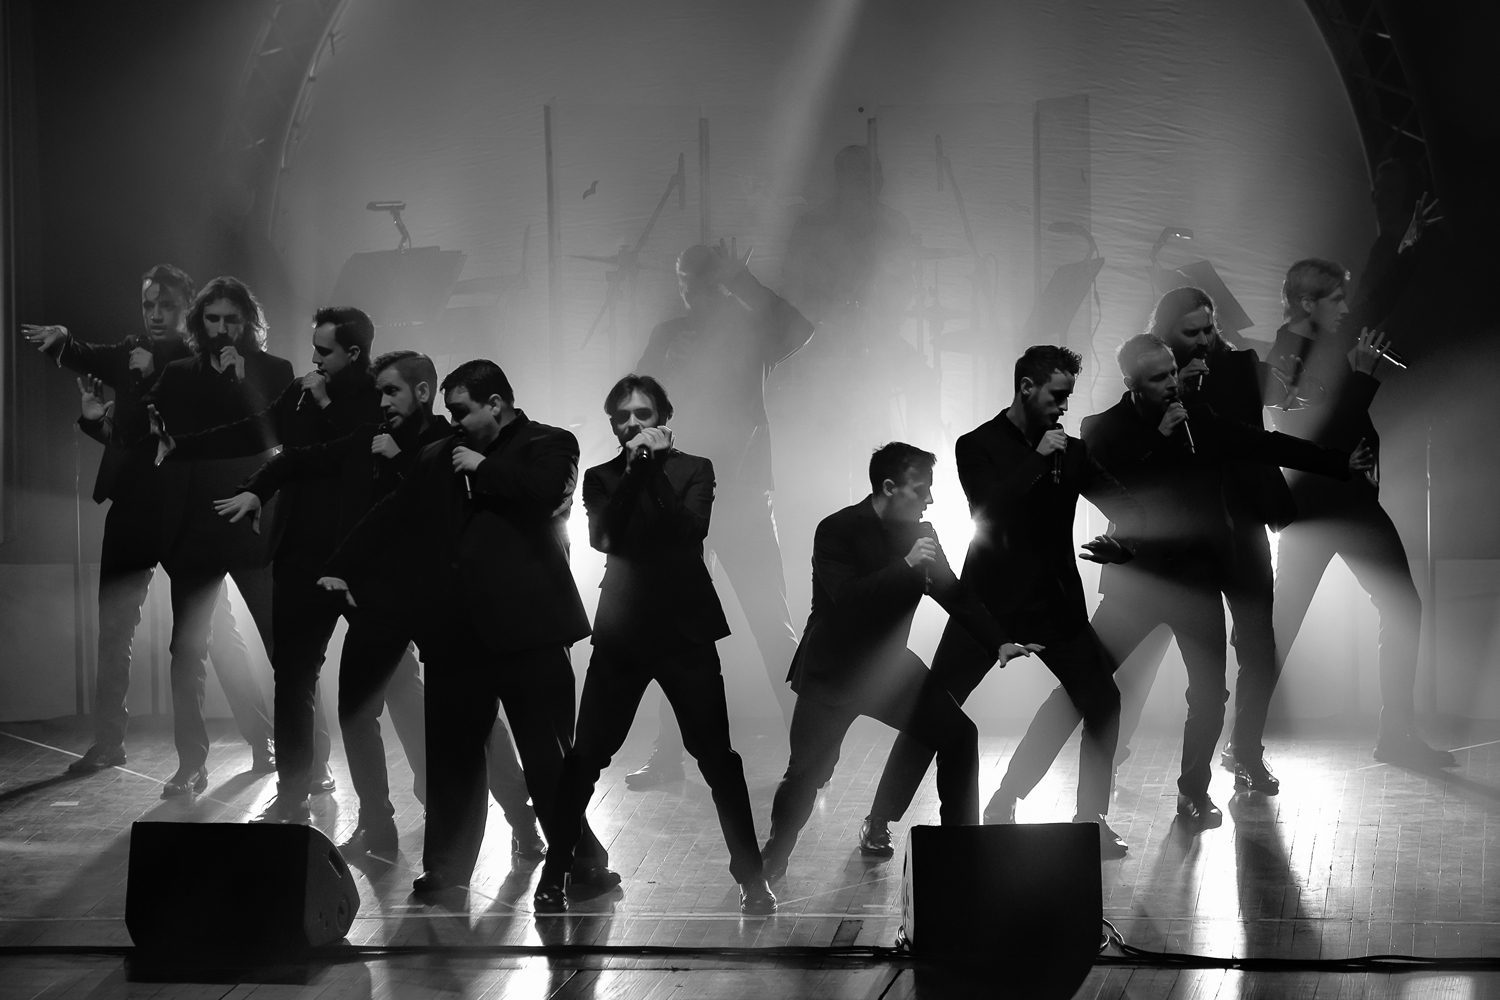 The 12 Tenors – Power of 12